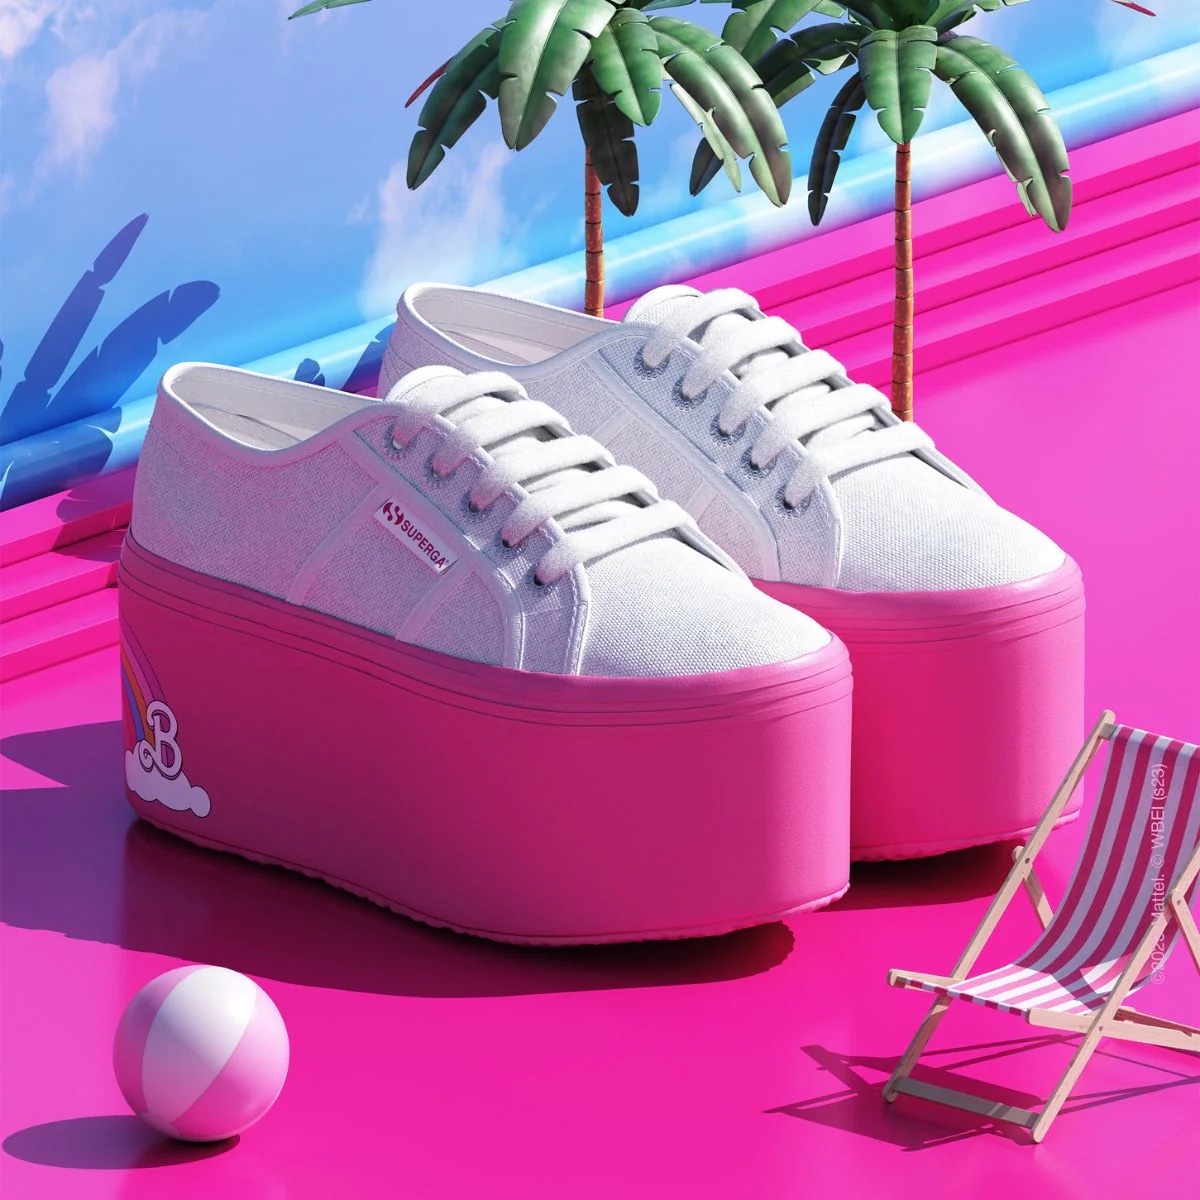 Are Superga platform sneakers actually the flyest Barbie fit? – Film Daily